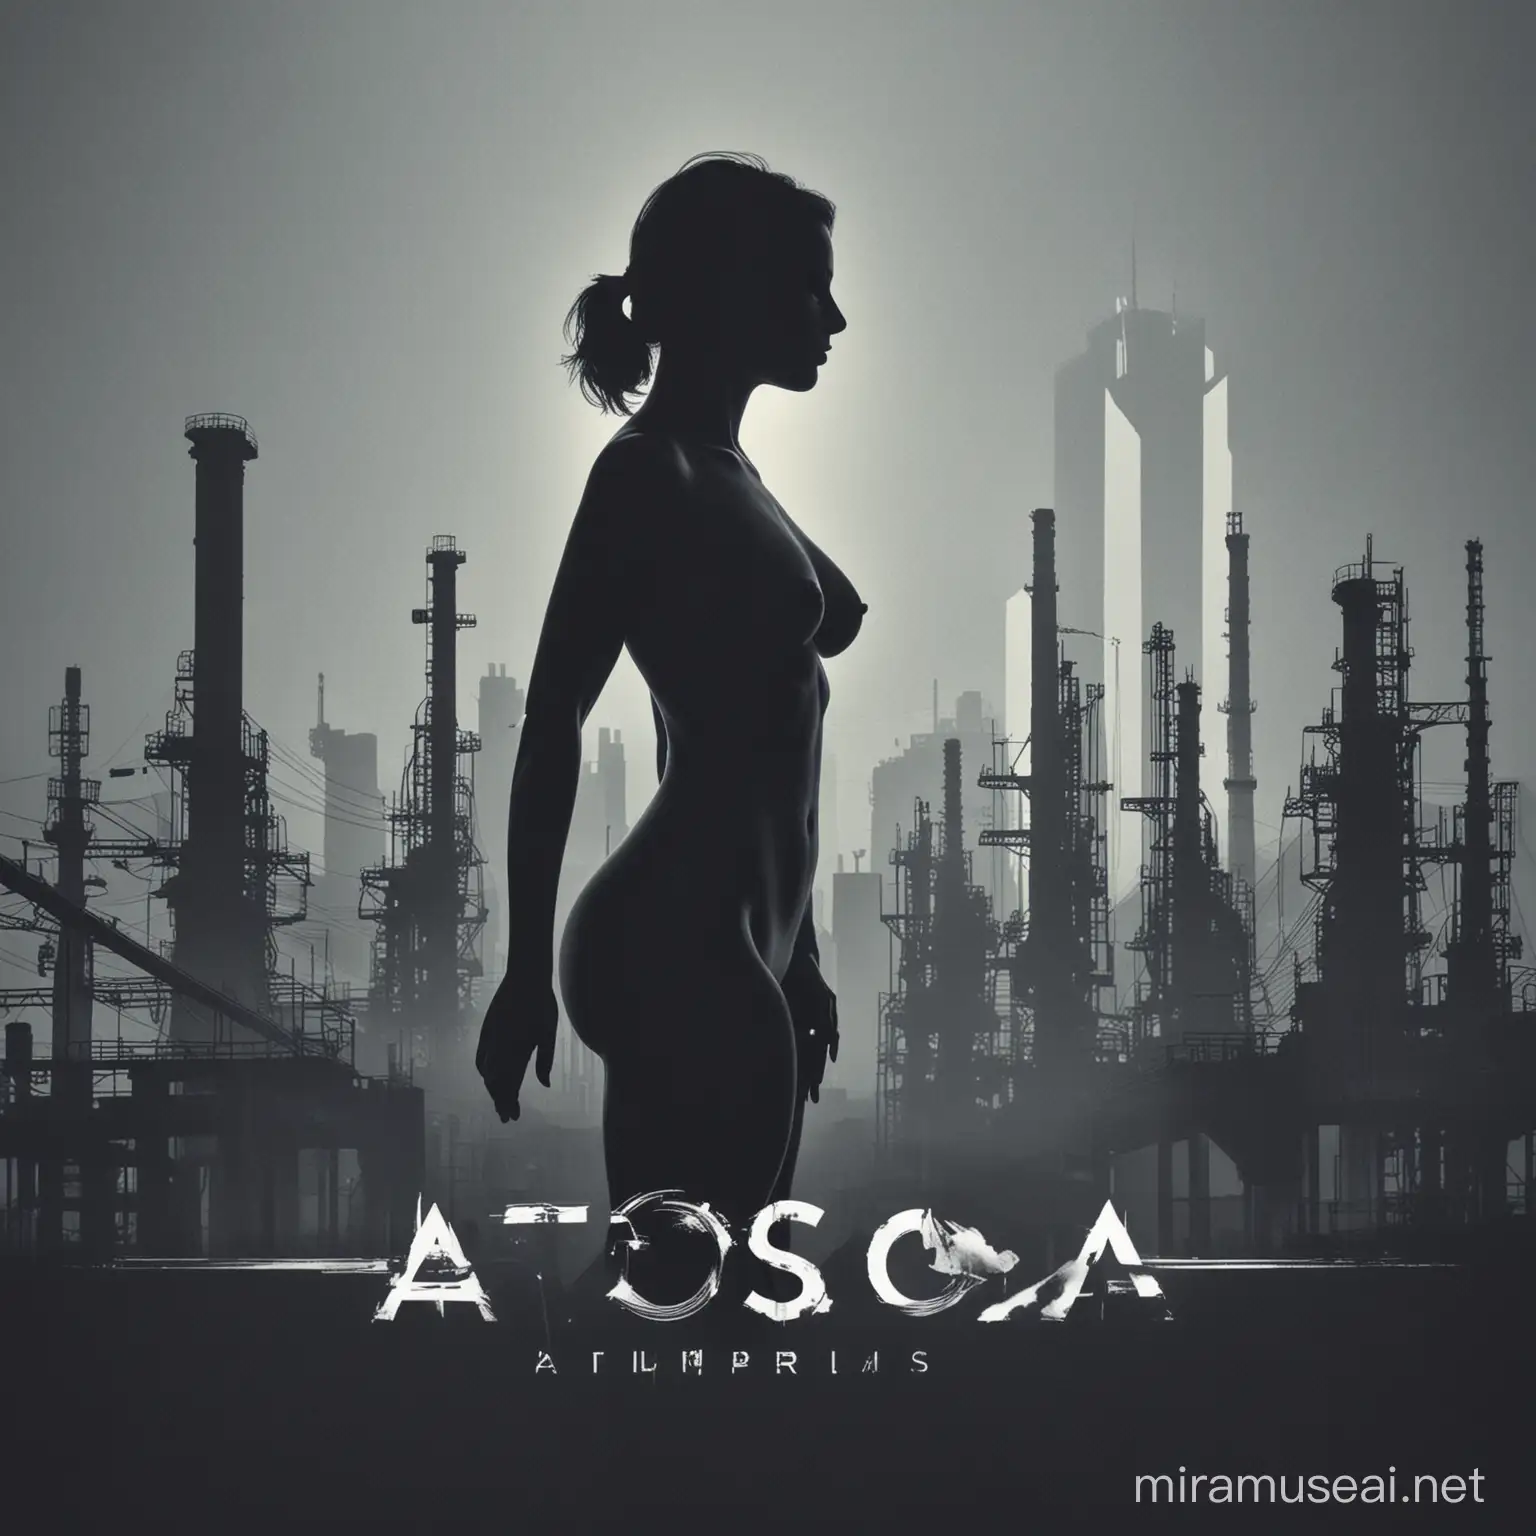 Traditional Woman Silhouette with Critical Infrastructure Background for Atossa Group Logo